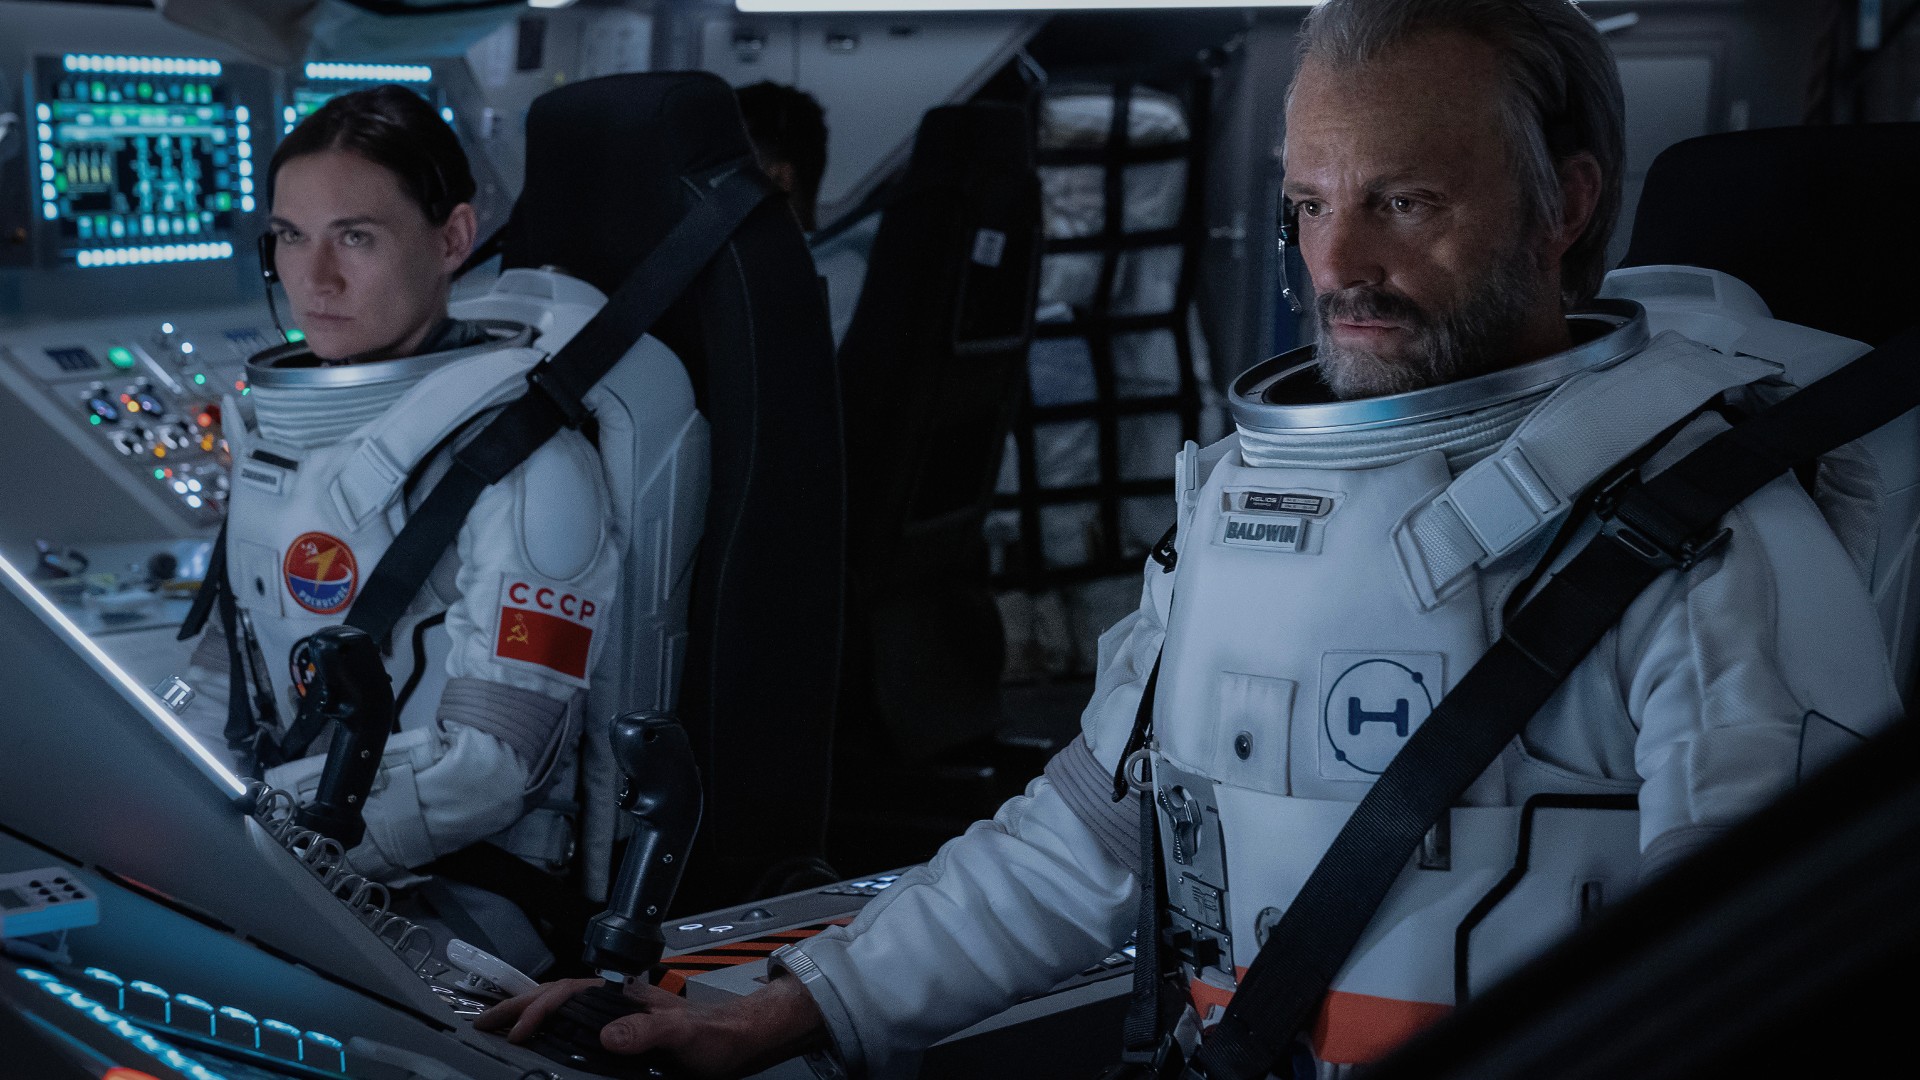 'For All Mankind' season 4 episode 3 review: A Cold War thriller set in ...